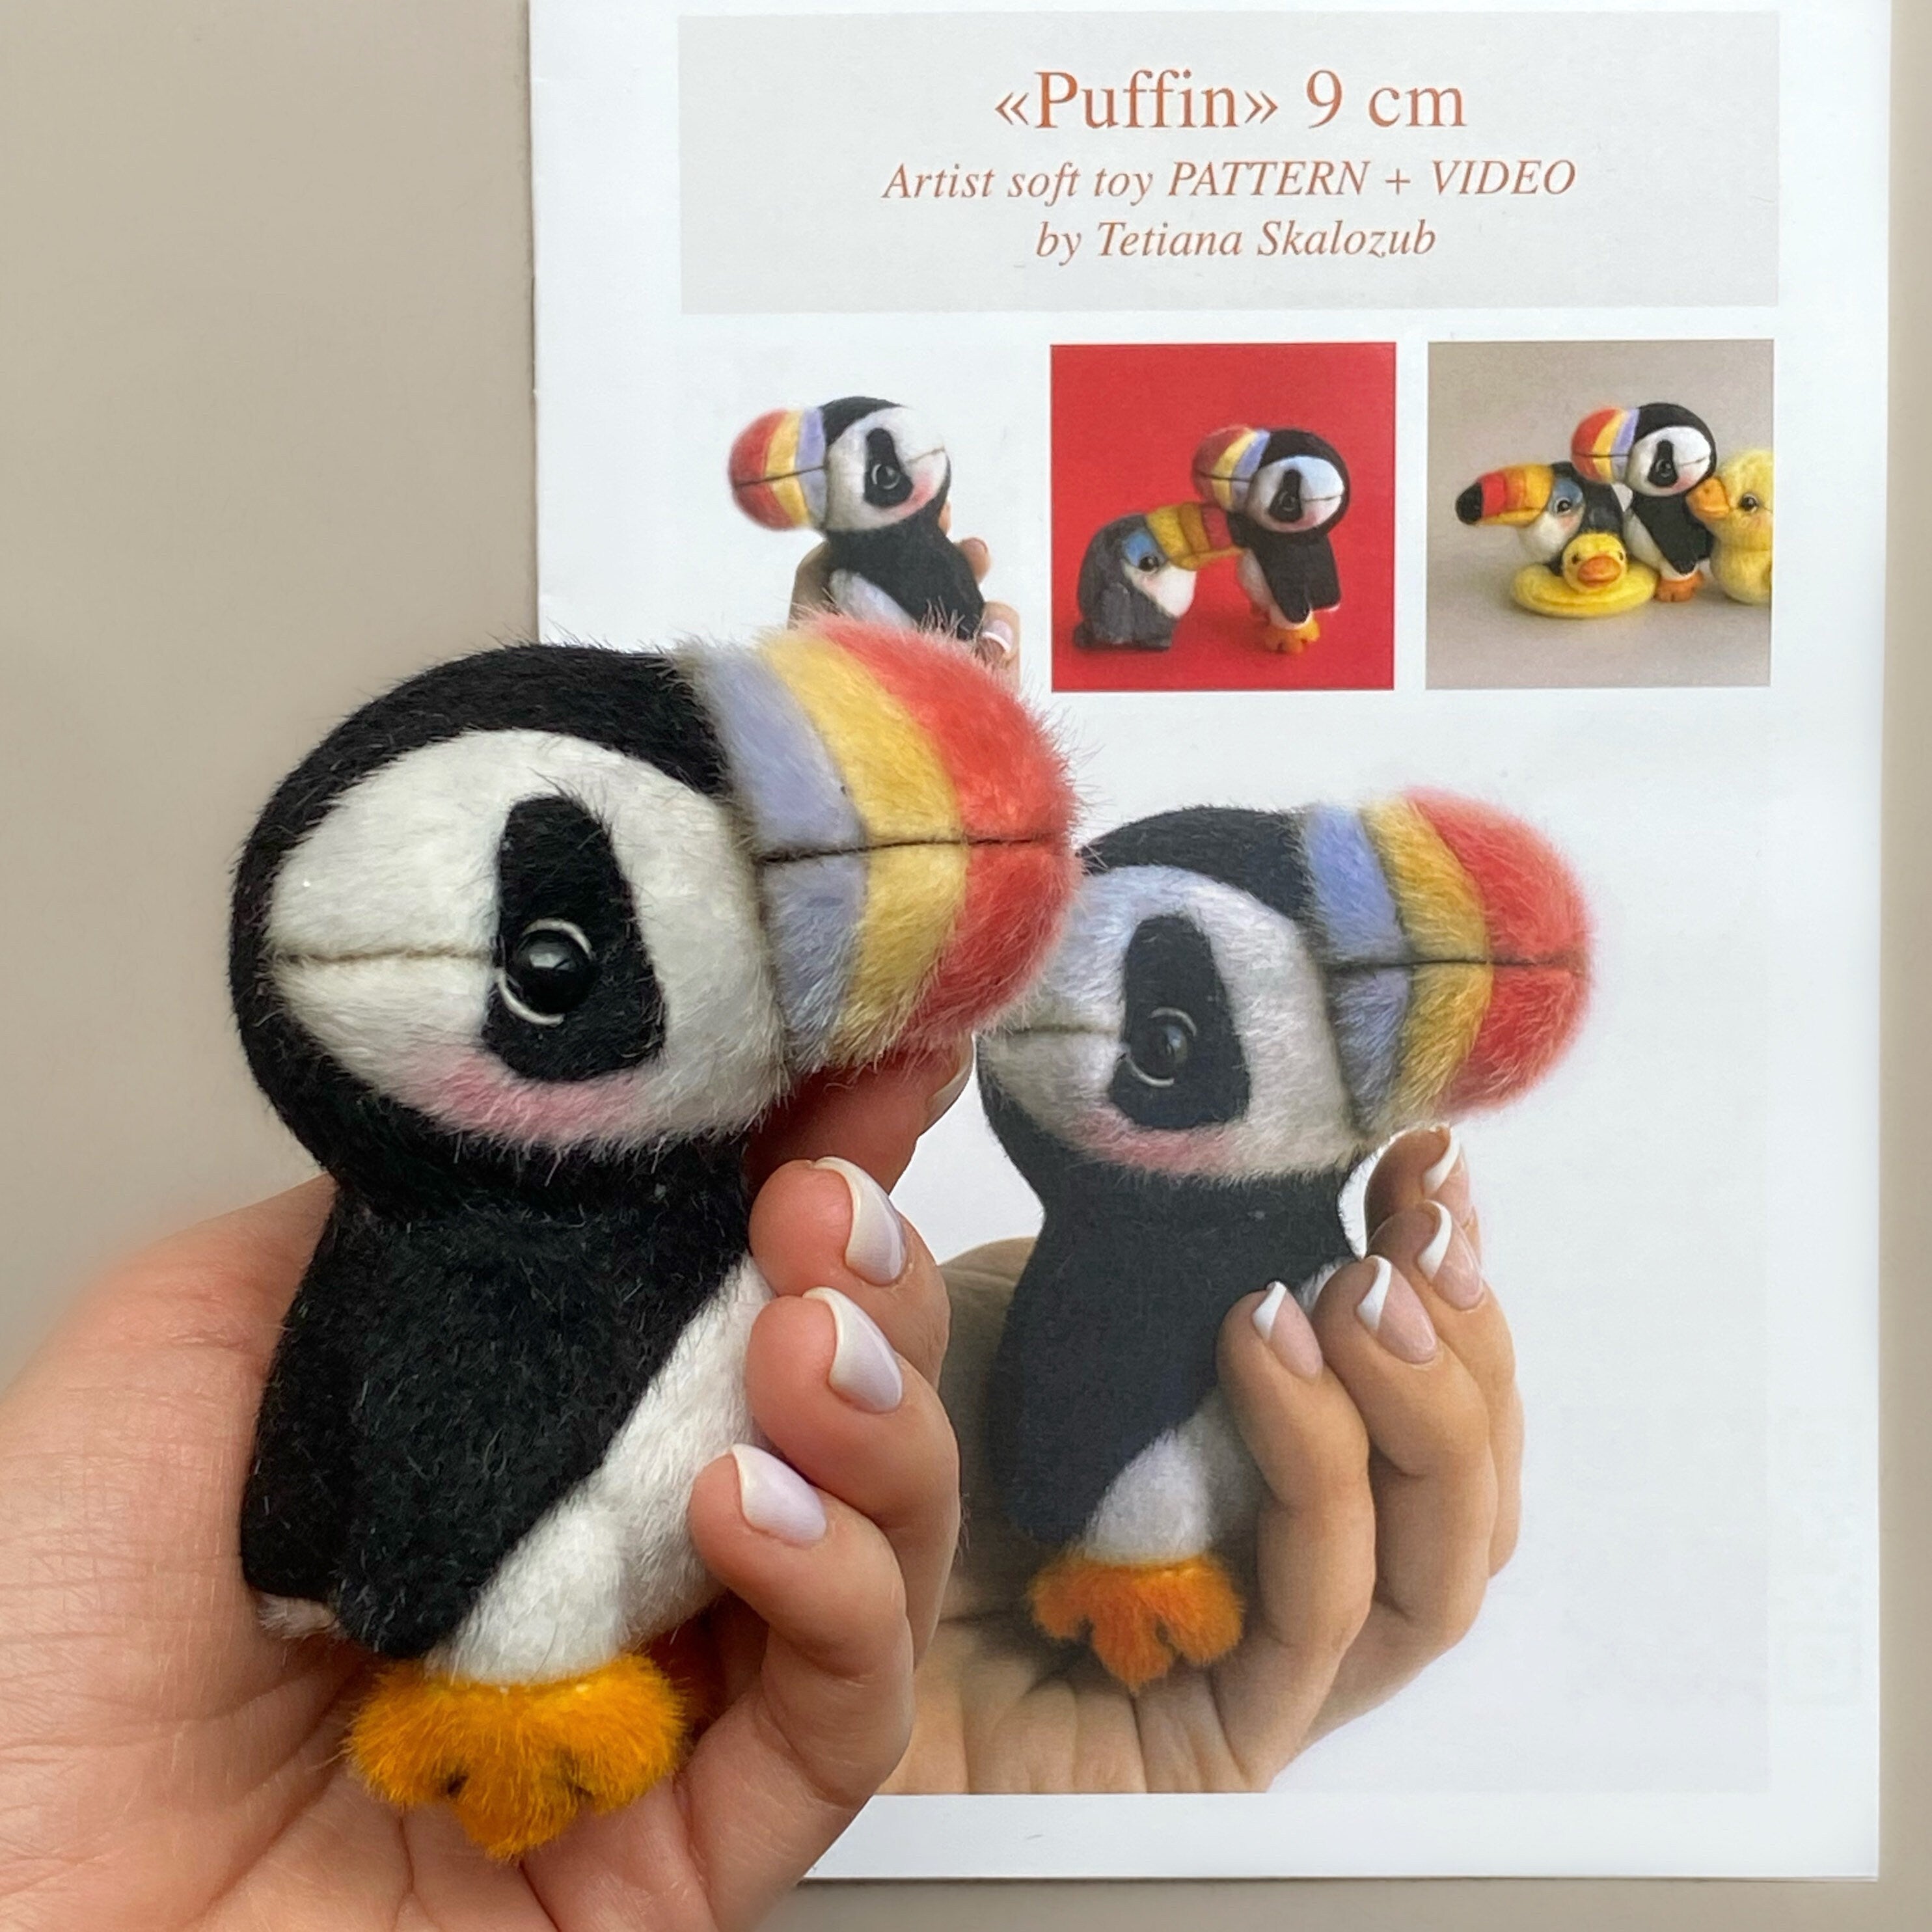 Puffin - Sewing KIT,  artist pattern, stuffed toy tutorials, diy a gift, bird soft toy diy craft kit for adults TSminibears